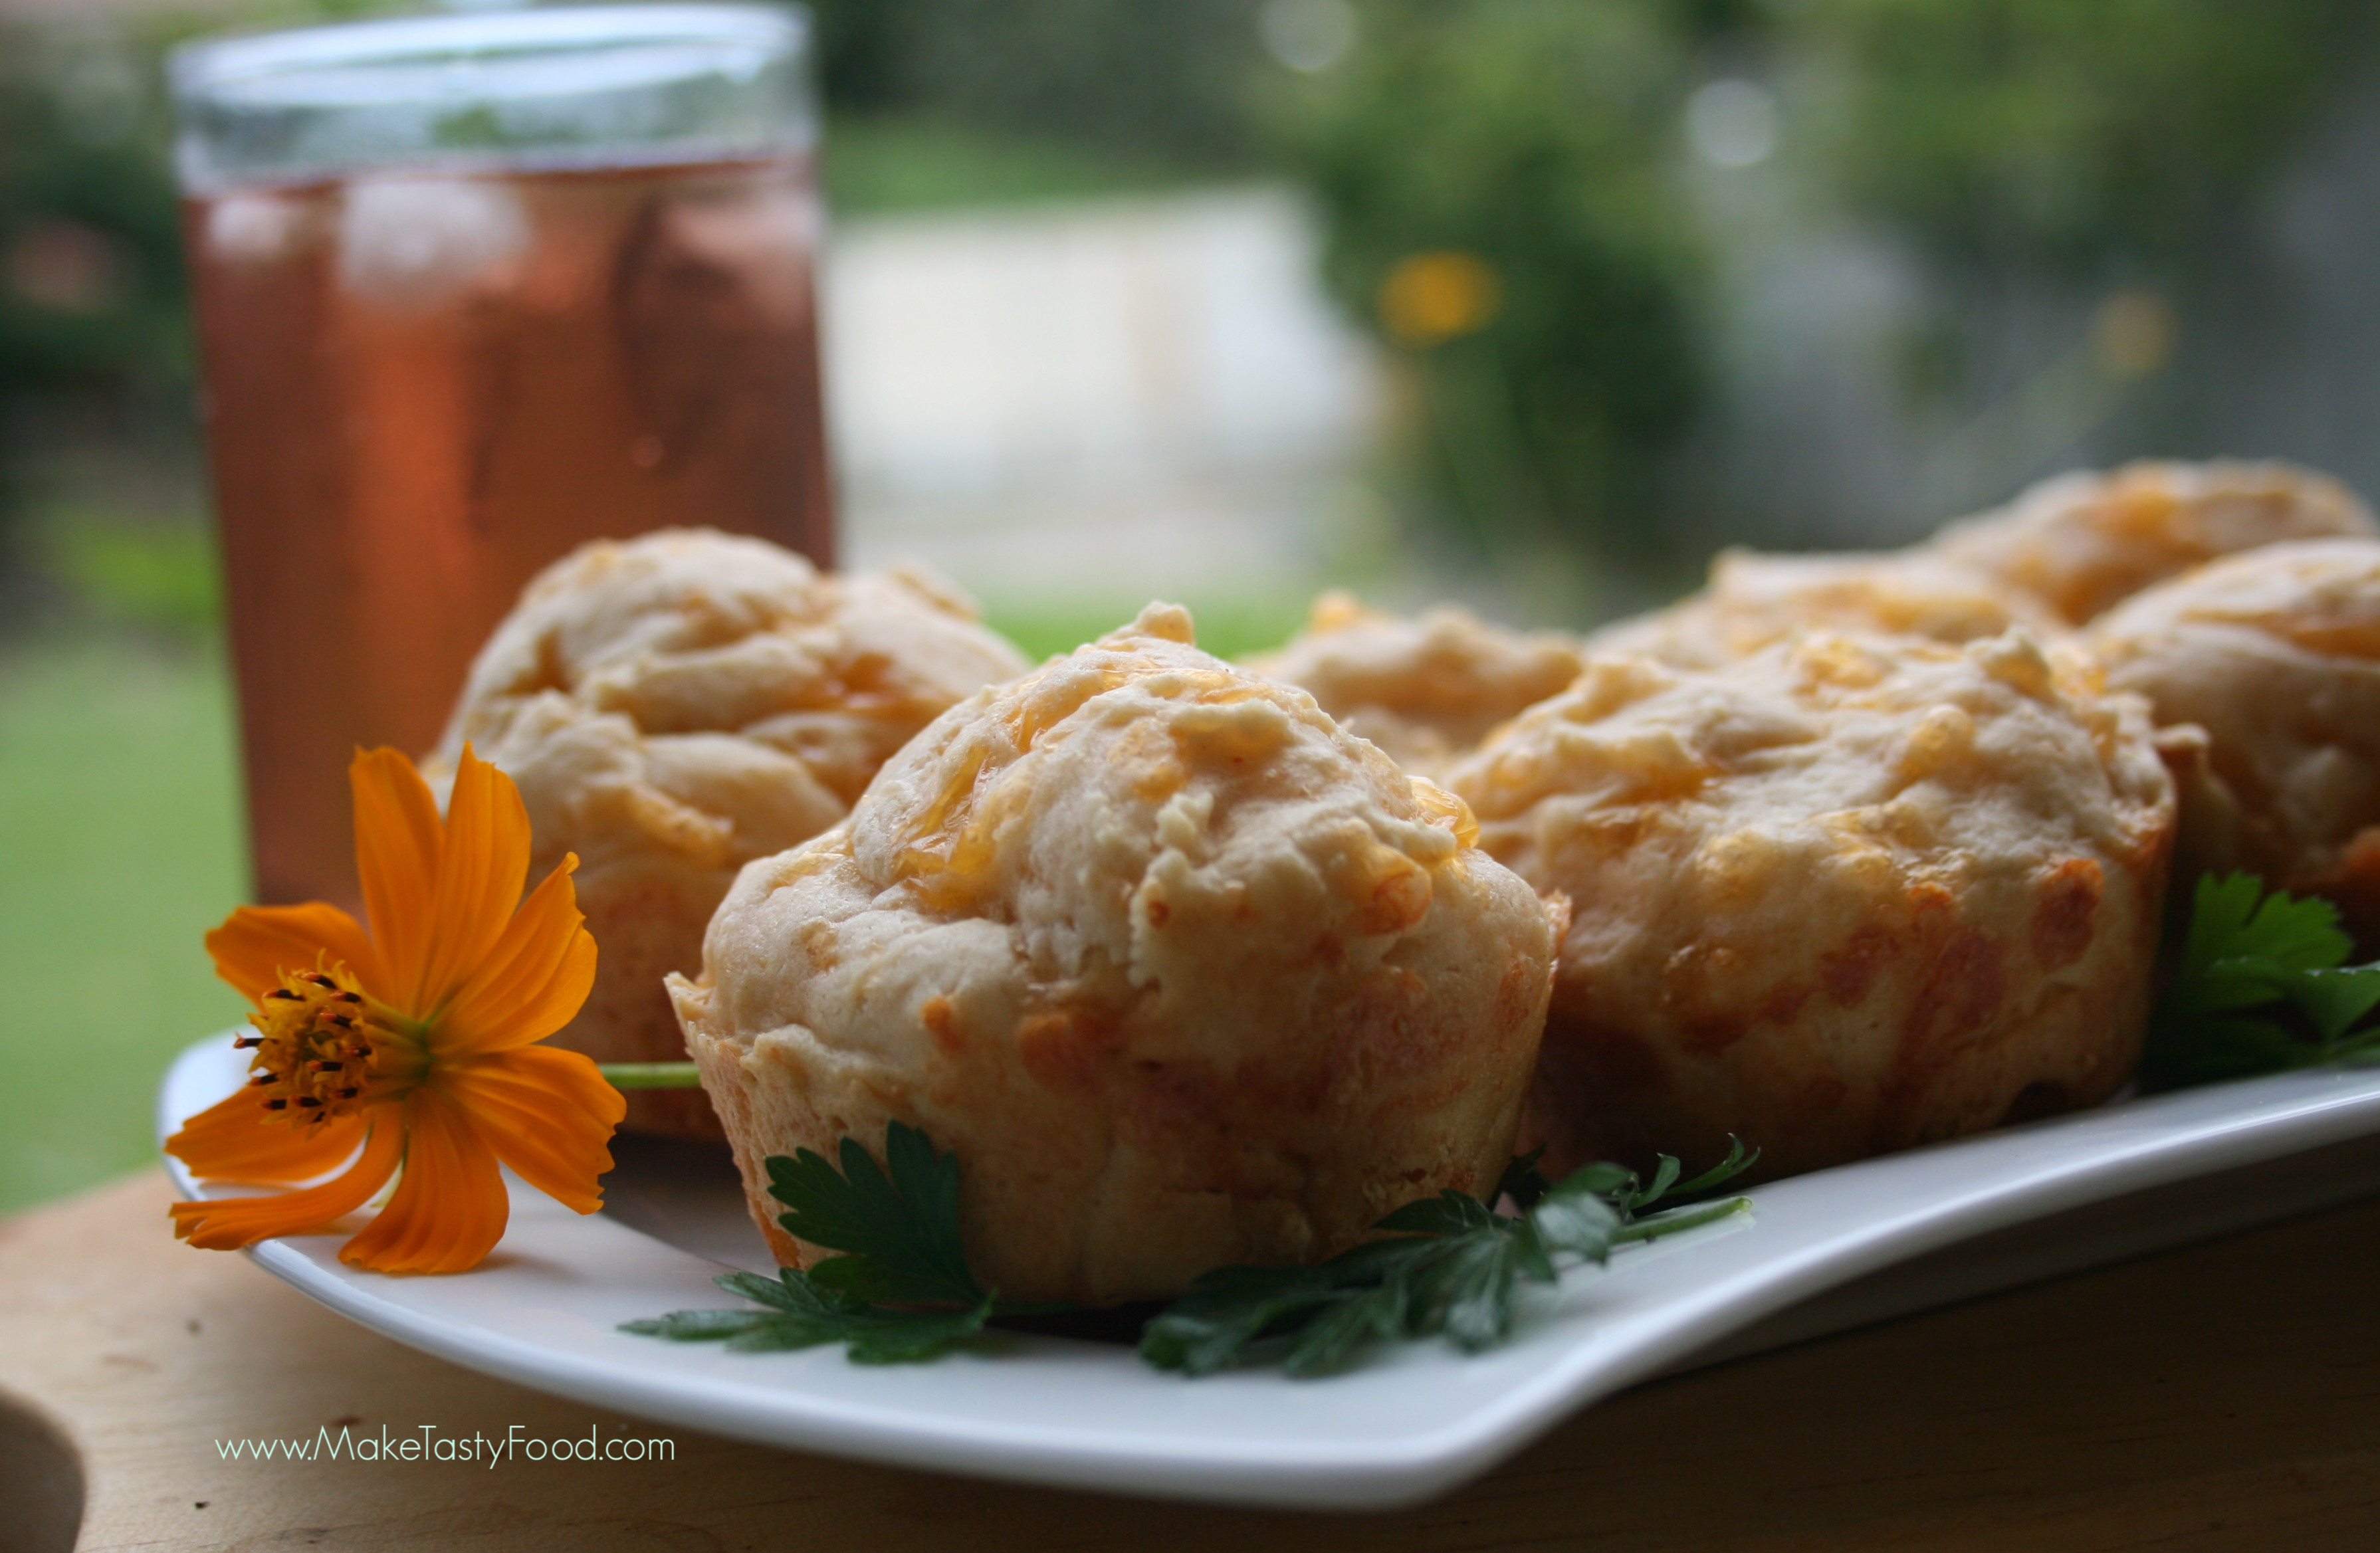 iced tea and cheese scone on a serving plate